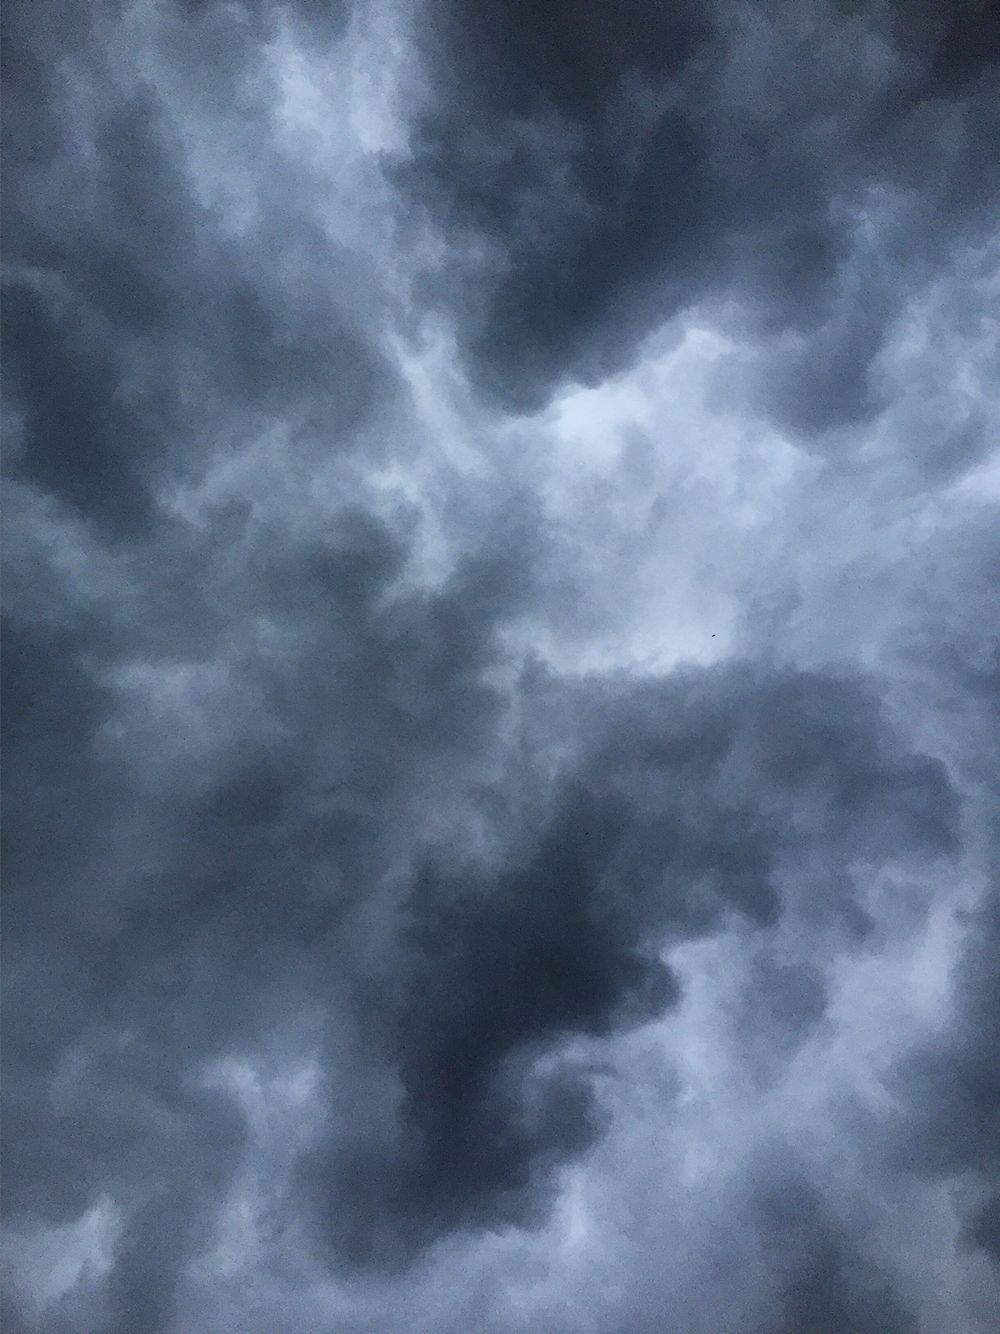 Gloomy storm clouds on Sunday Afternoon. Taken with iPhone 6. Edited using the Photo App. You can use it as your wallpaper. #iphon. Clouds, Photo apps, Wallpaper